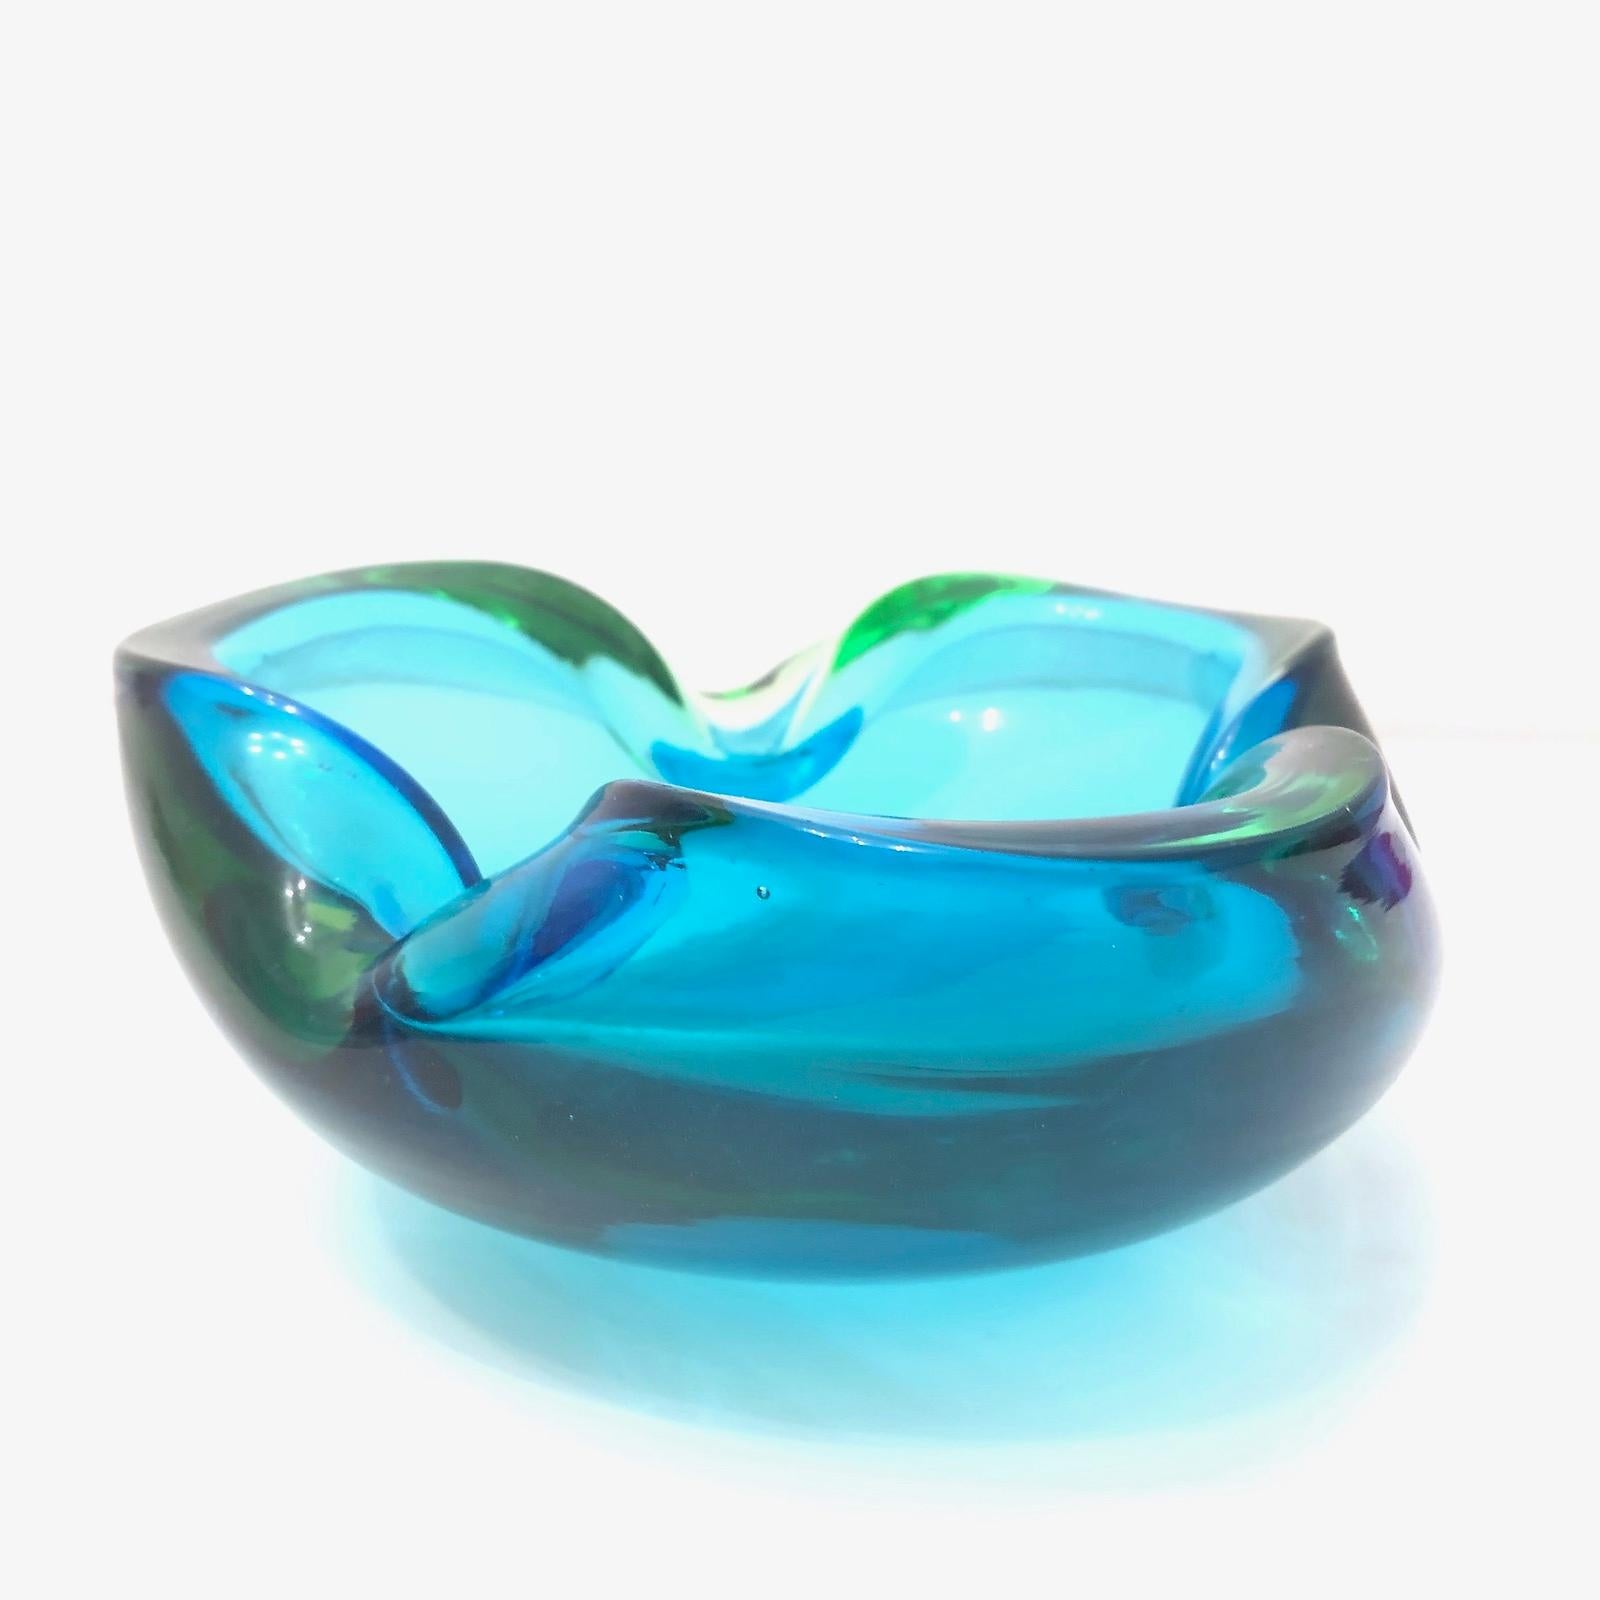 Italian Murano Art Glass Bowl Catchall Blue and green Vintage, Italy, 1970s